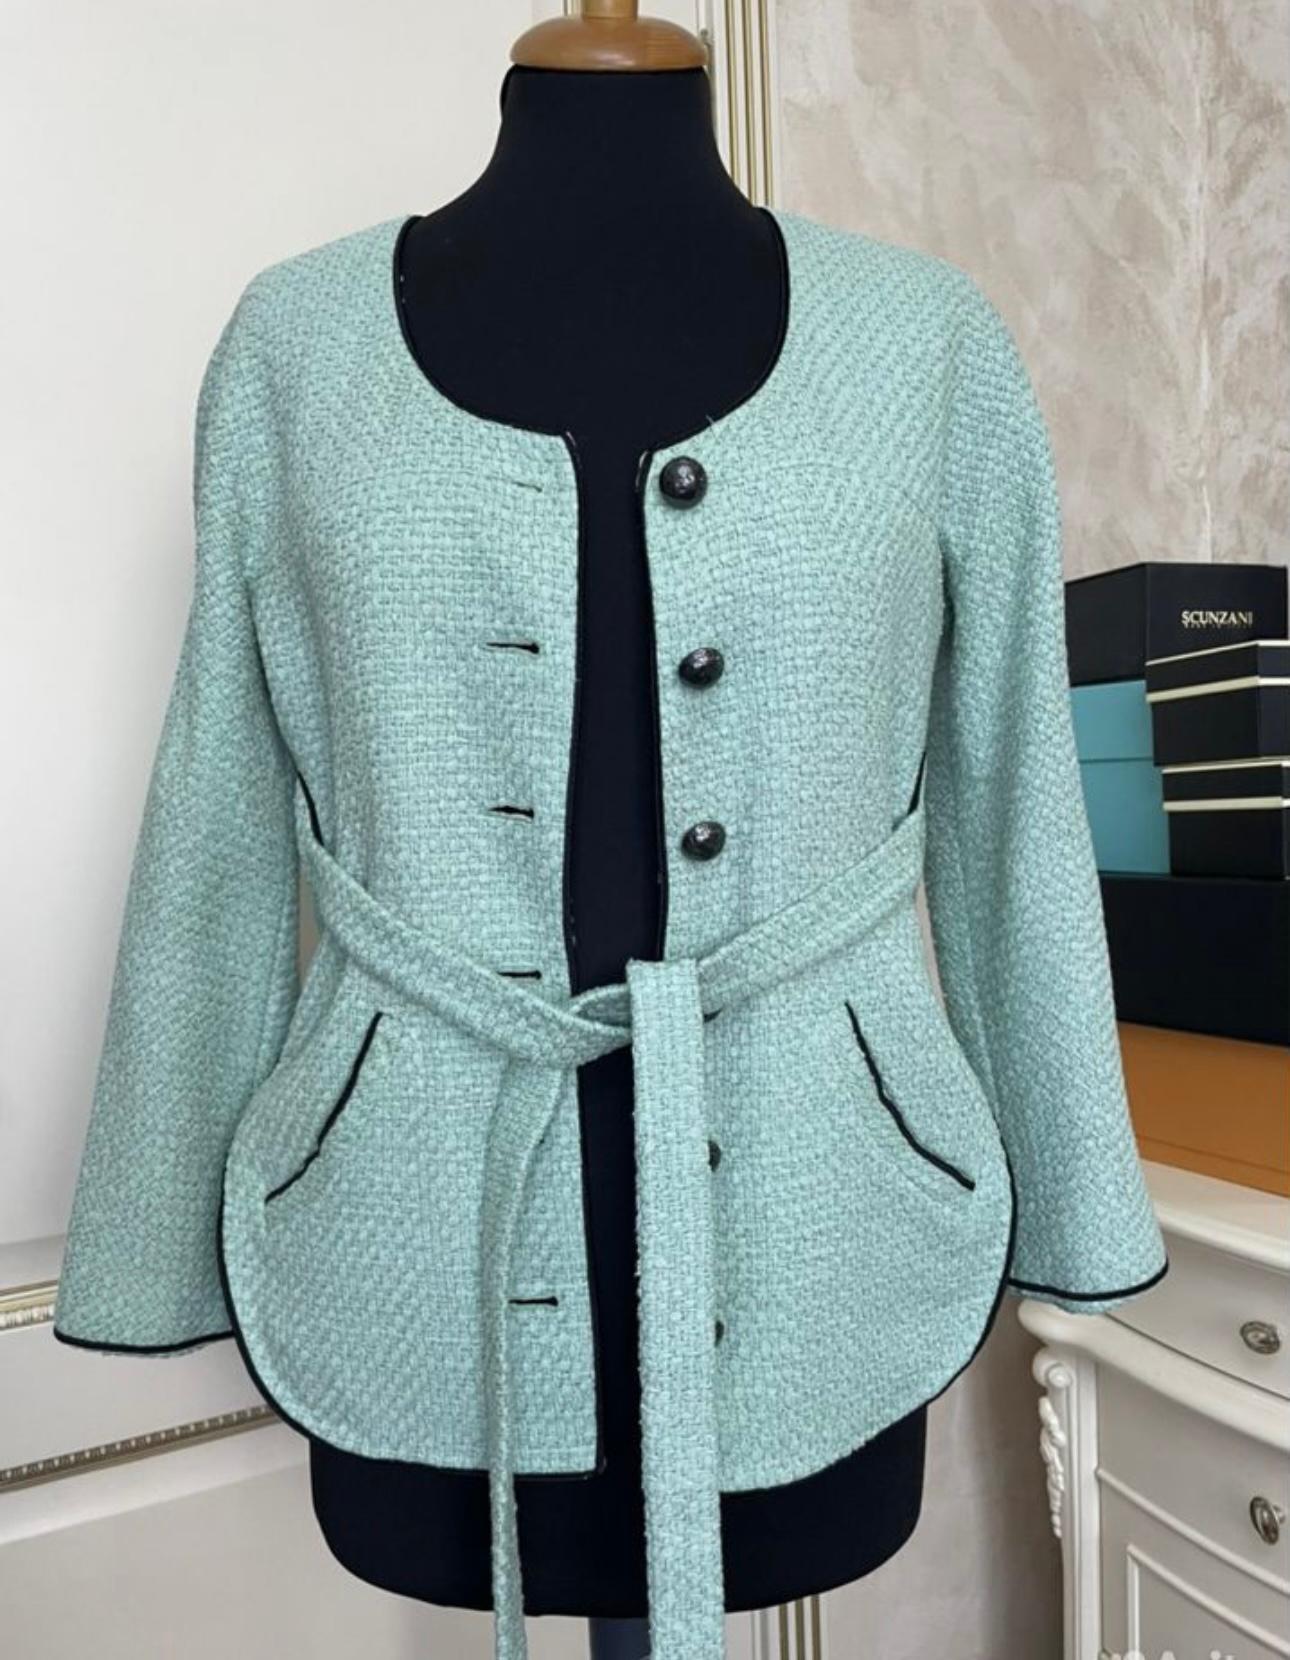 Chanel Vogue Cover Turquoise Tweed Jacket with Belt For Sale 7